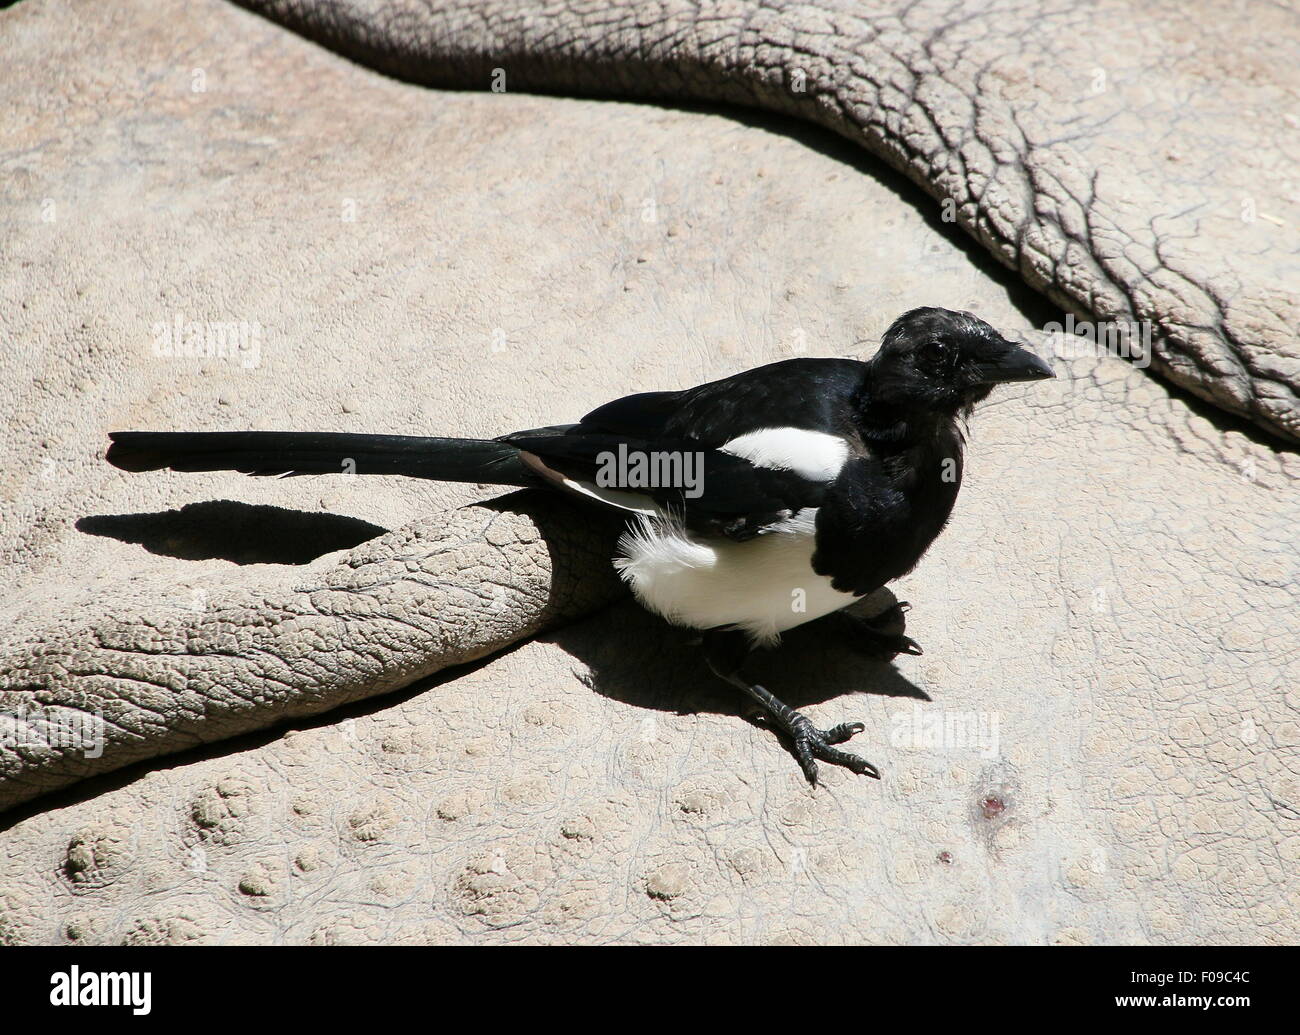 Eurasian magpie looking for parasites on the body of a Greater one-horned Indian rhinoceros (Rhinoceros unicornis) Stock Photo